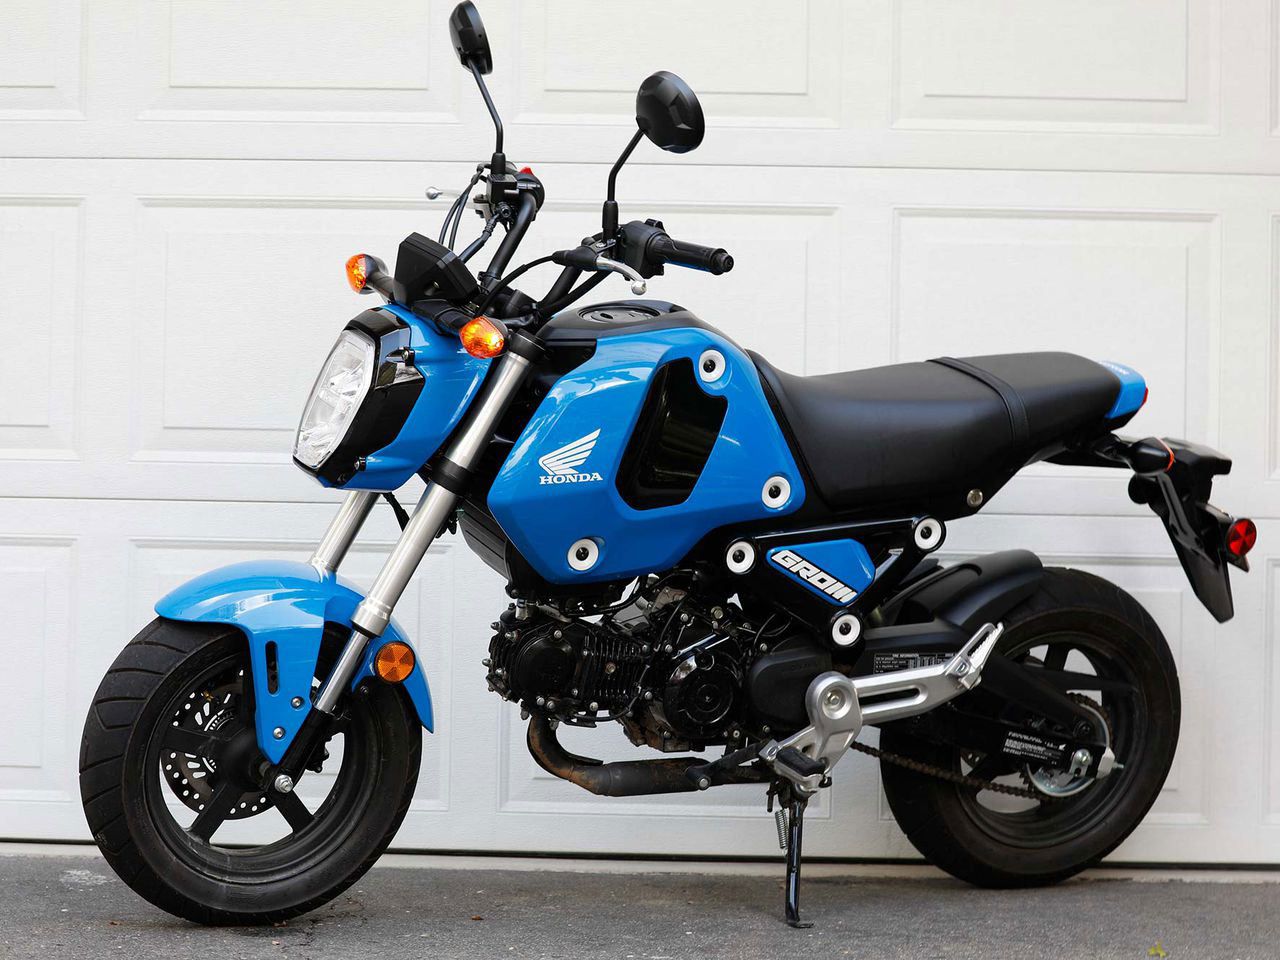 The Honda Grom ABS always garners attention.